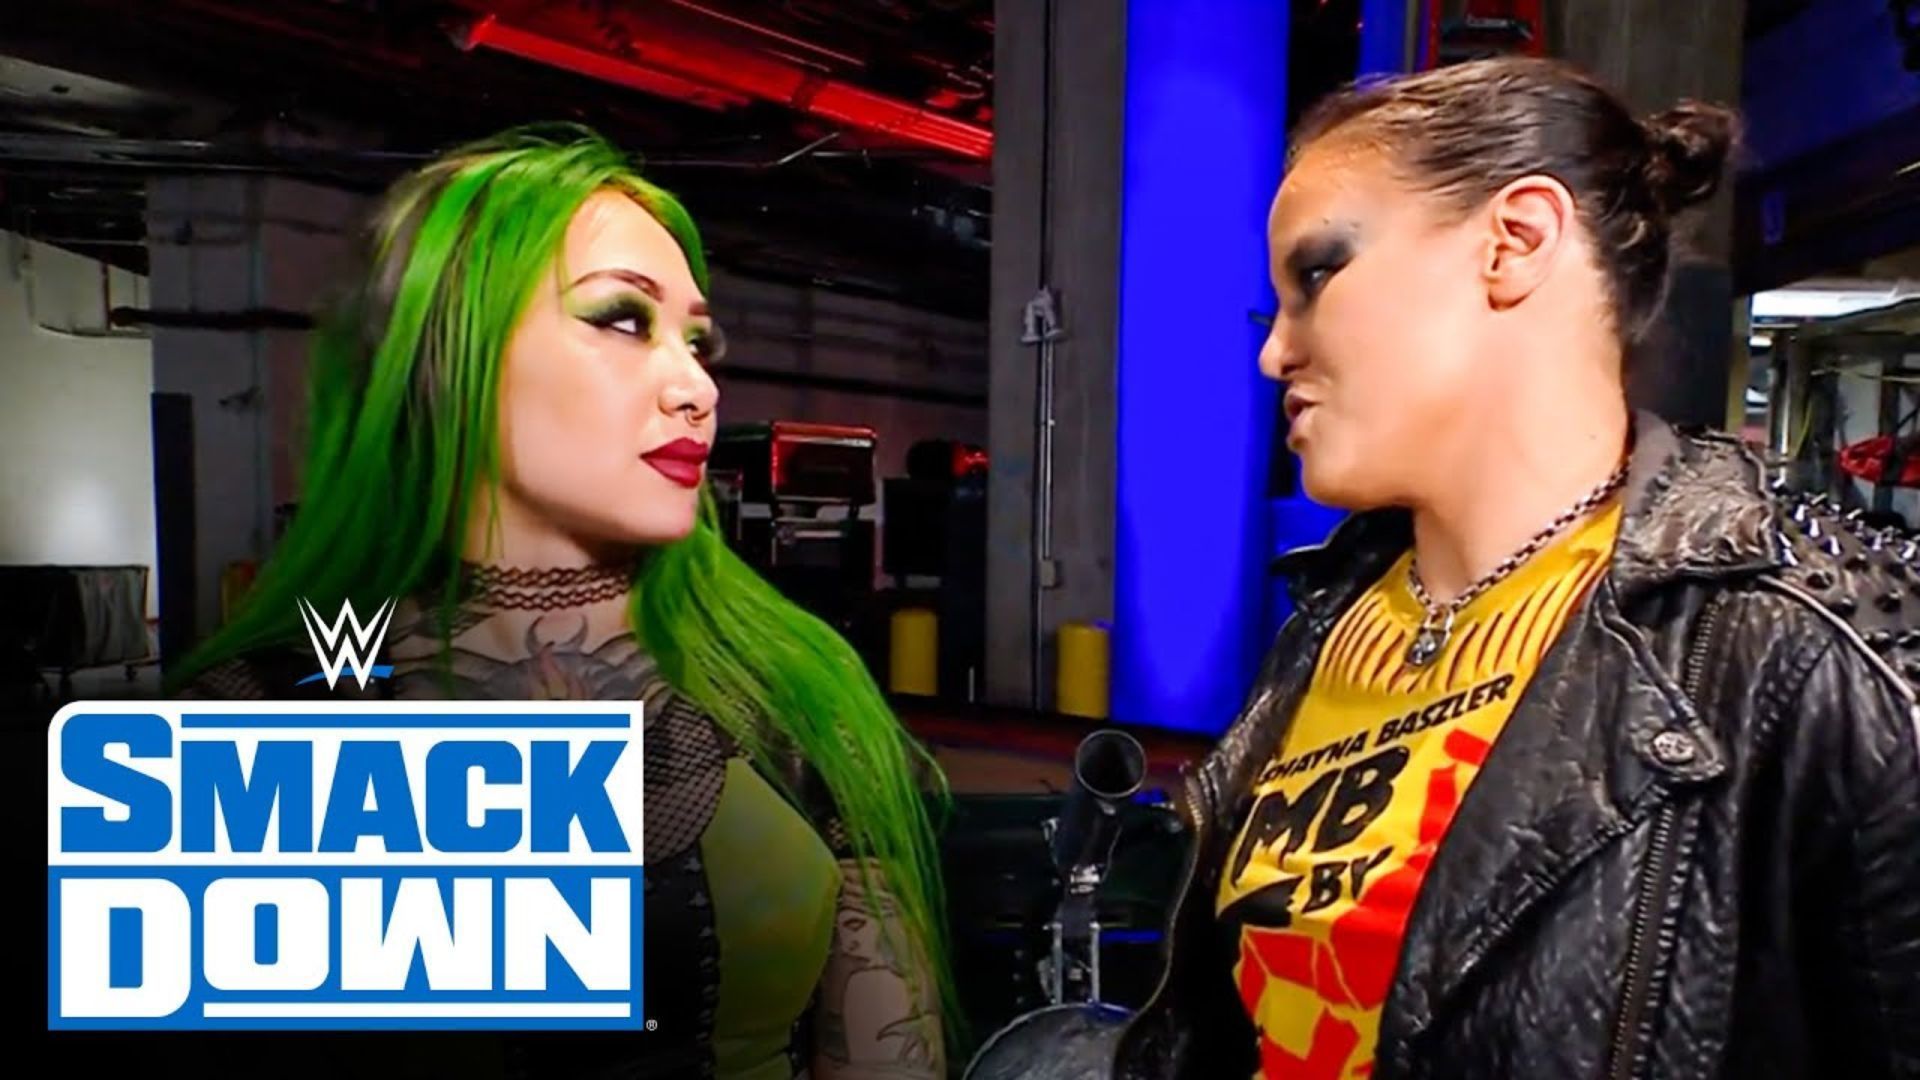 Shotzi and Shayna Baszler will meet on Dec 9 in singles action